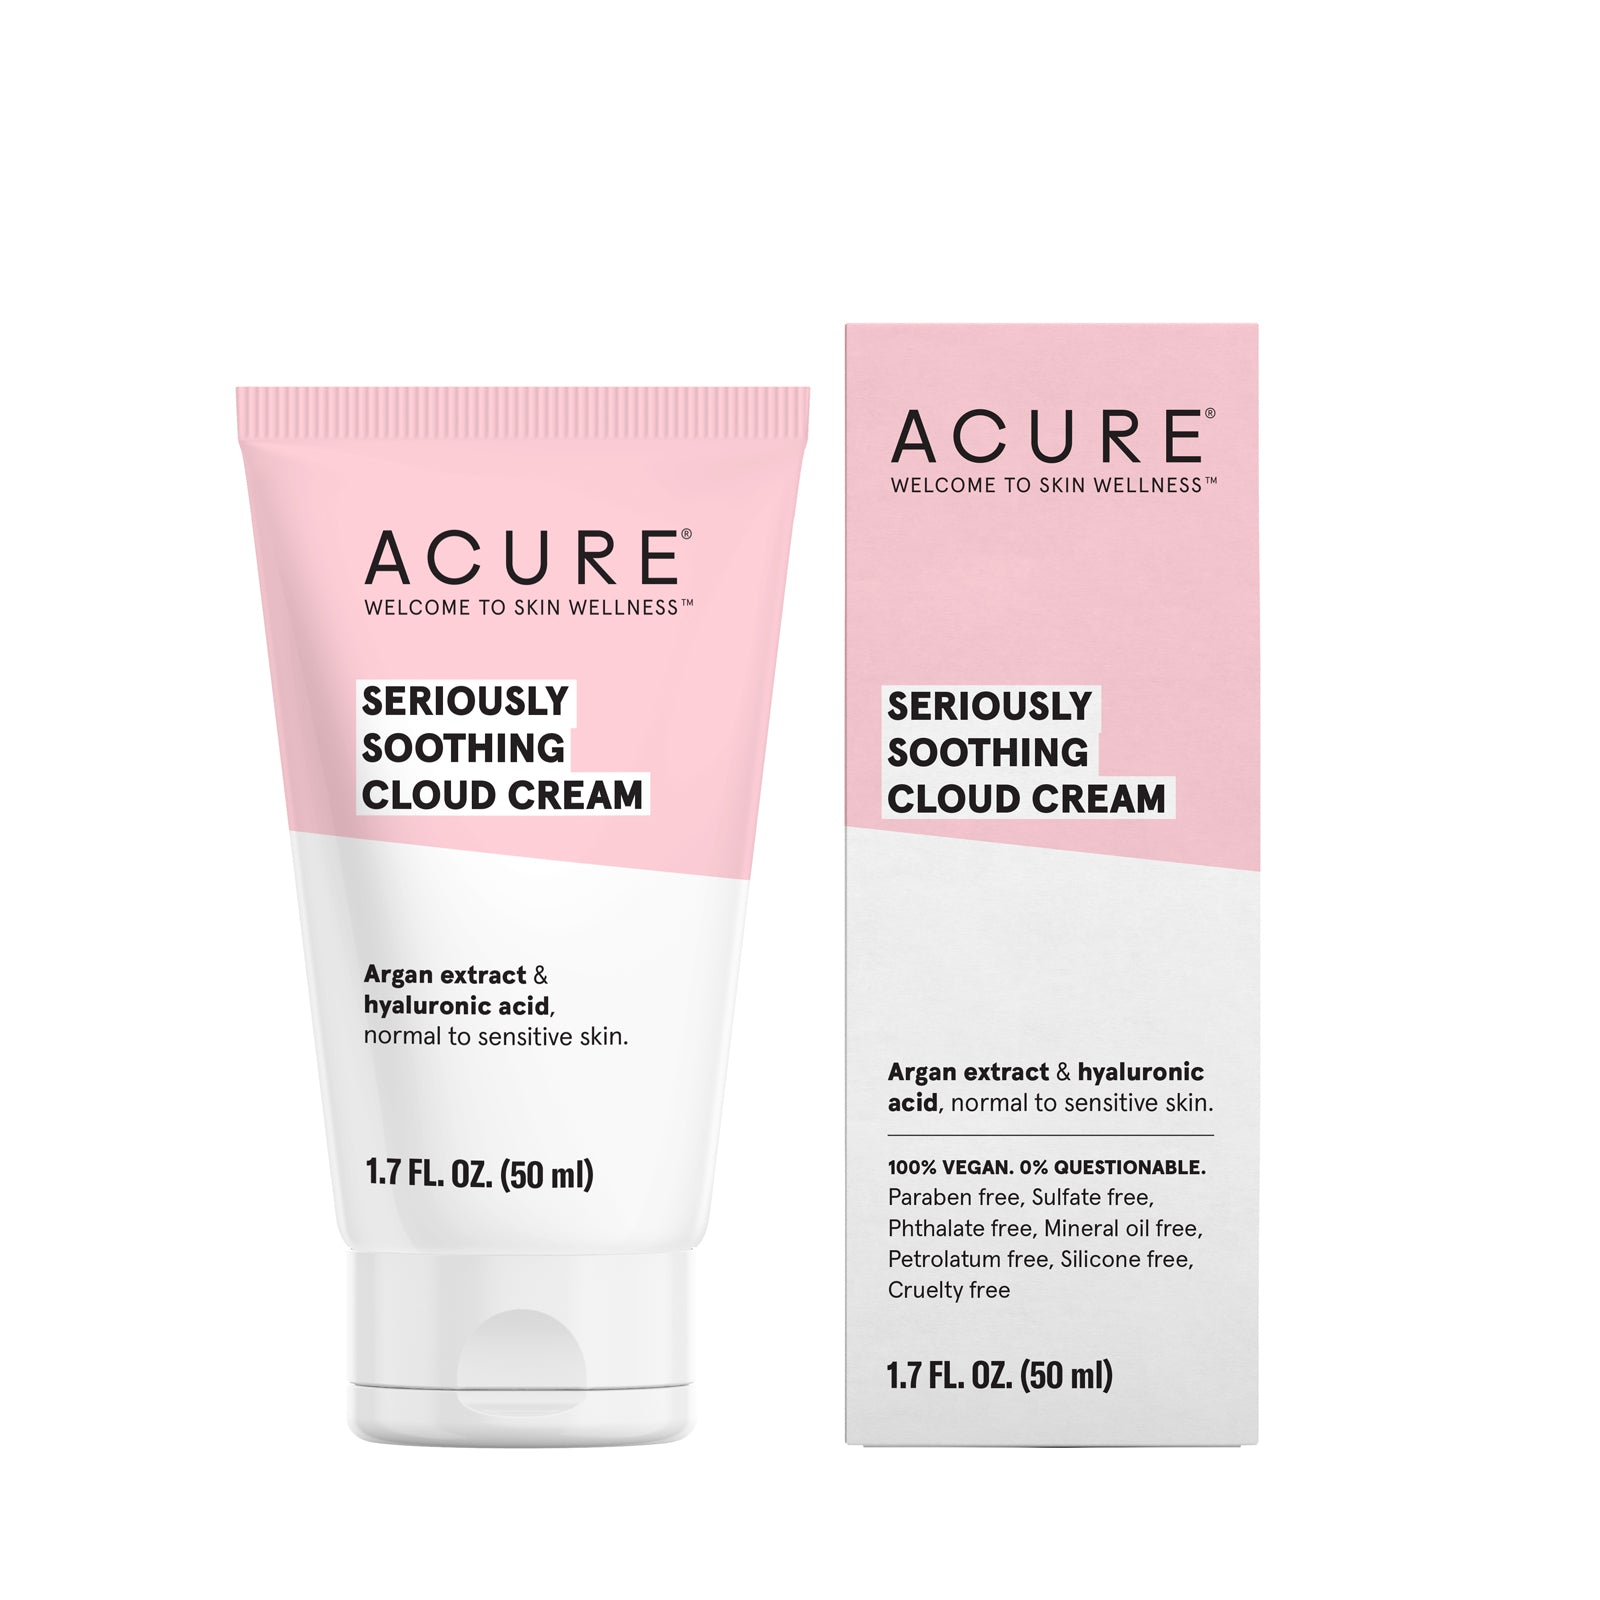 Acure Seriously Soothing Cloud Cream (50ml) - Lifestyle Markets